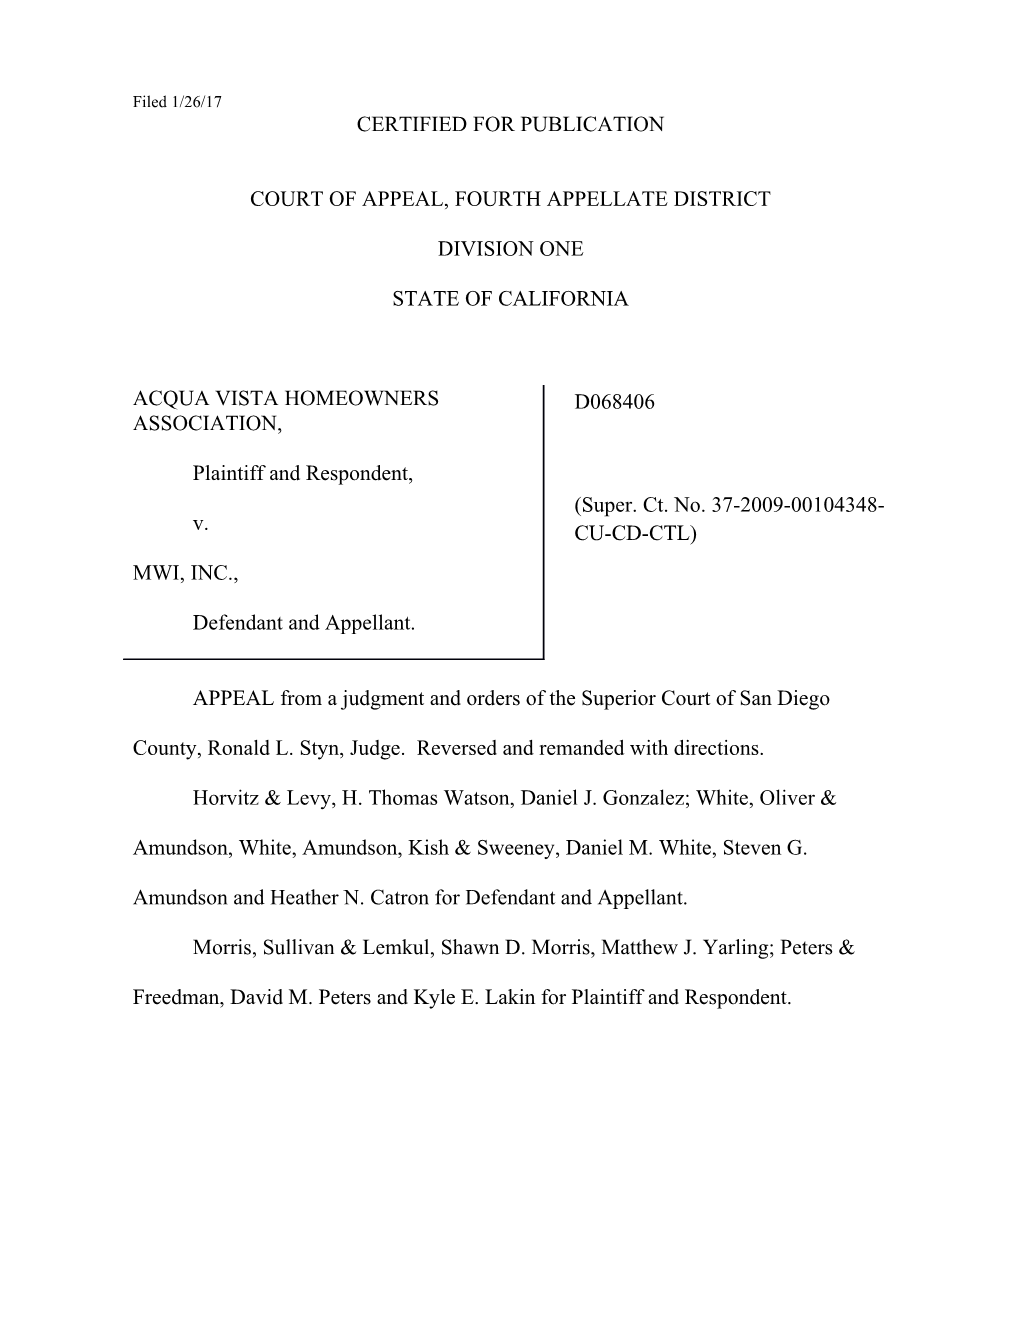 Court of Appeal, Fourth Appellate District s3